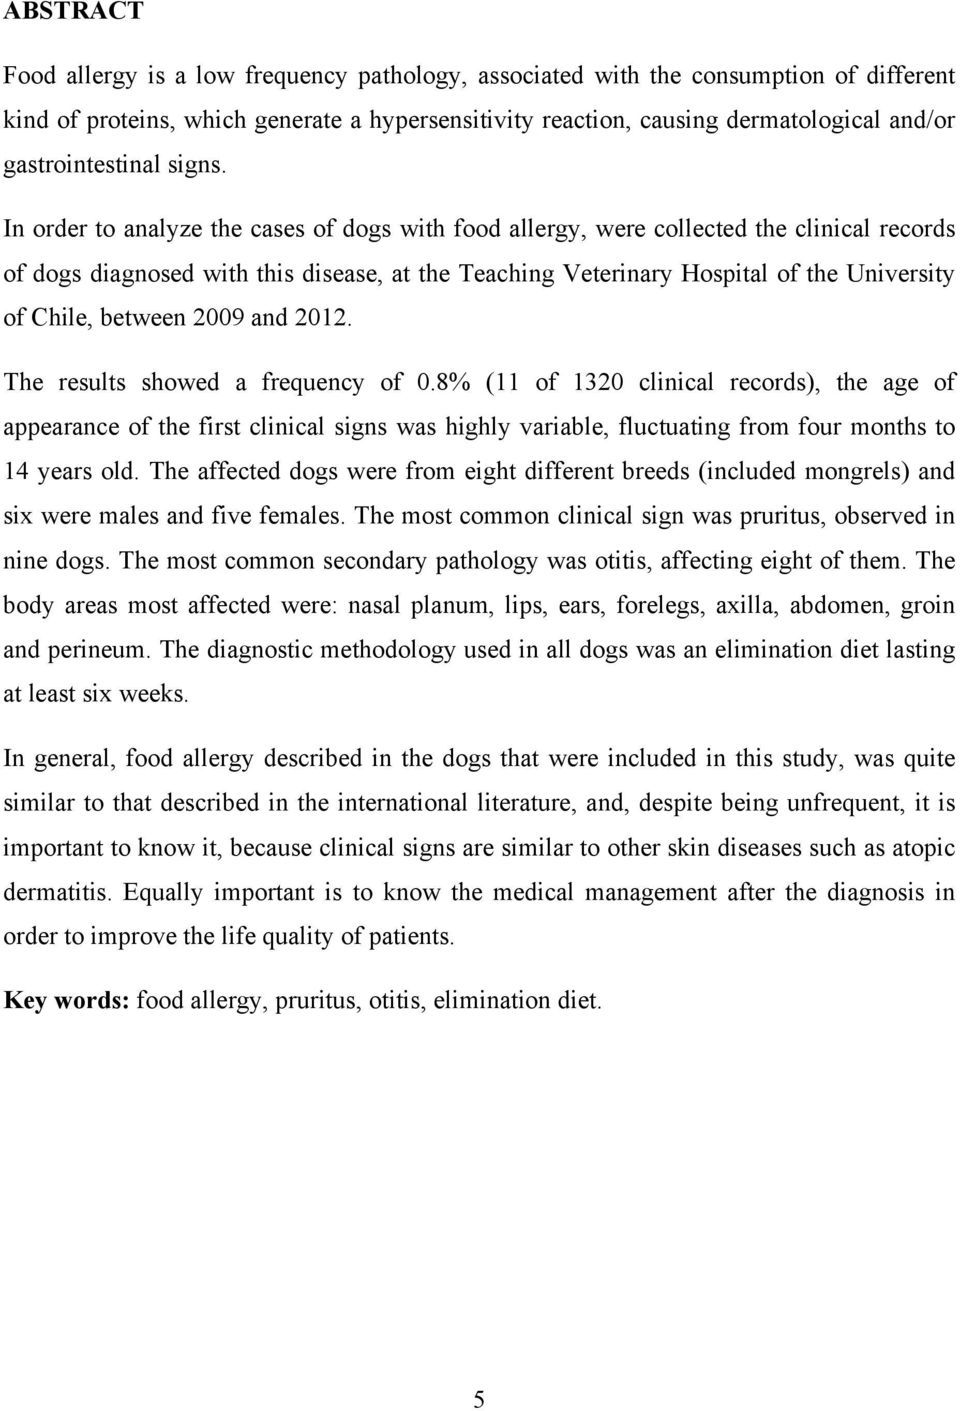 In order to analyze the cases of dogs with food allergy, were collected the clinical records of dogs diagnosed with this disease, at the Teaching Veterinary Hospital of the University of Chile,